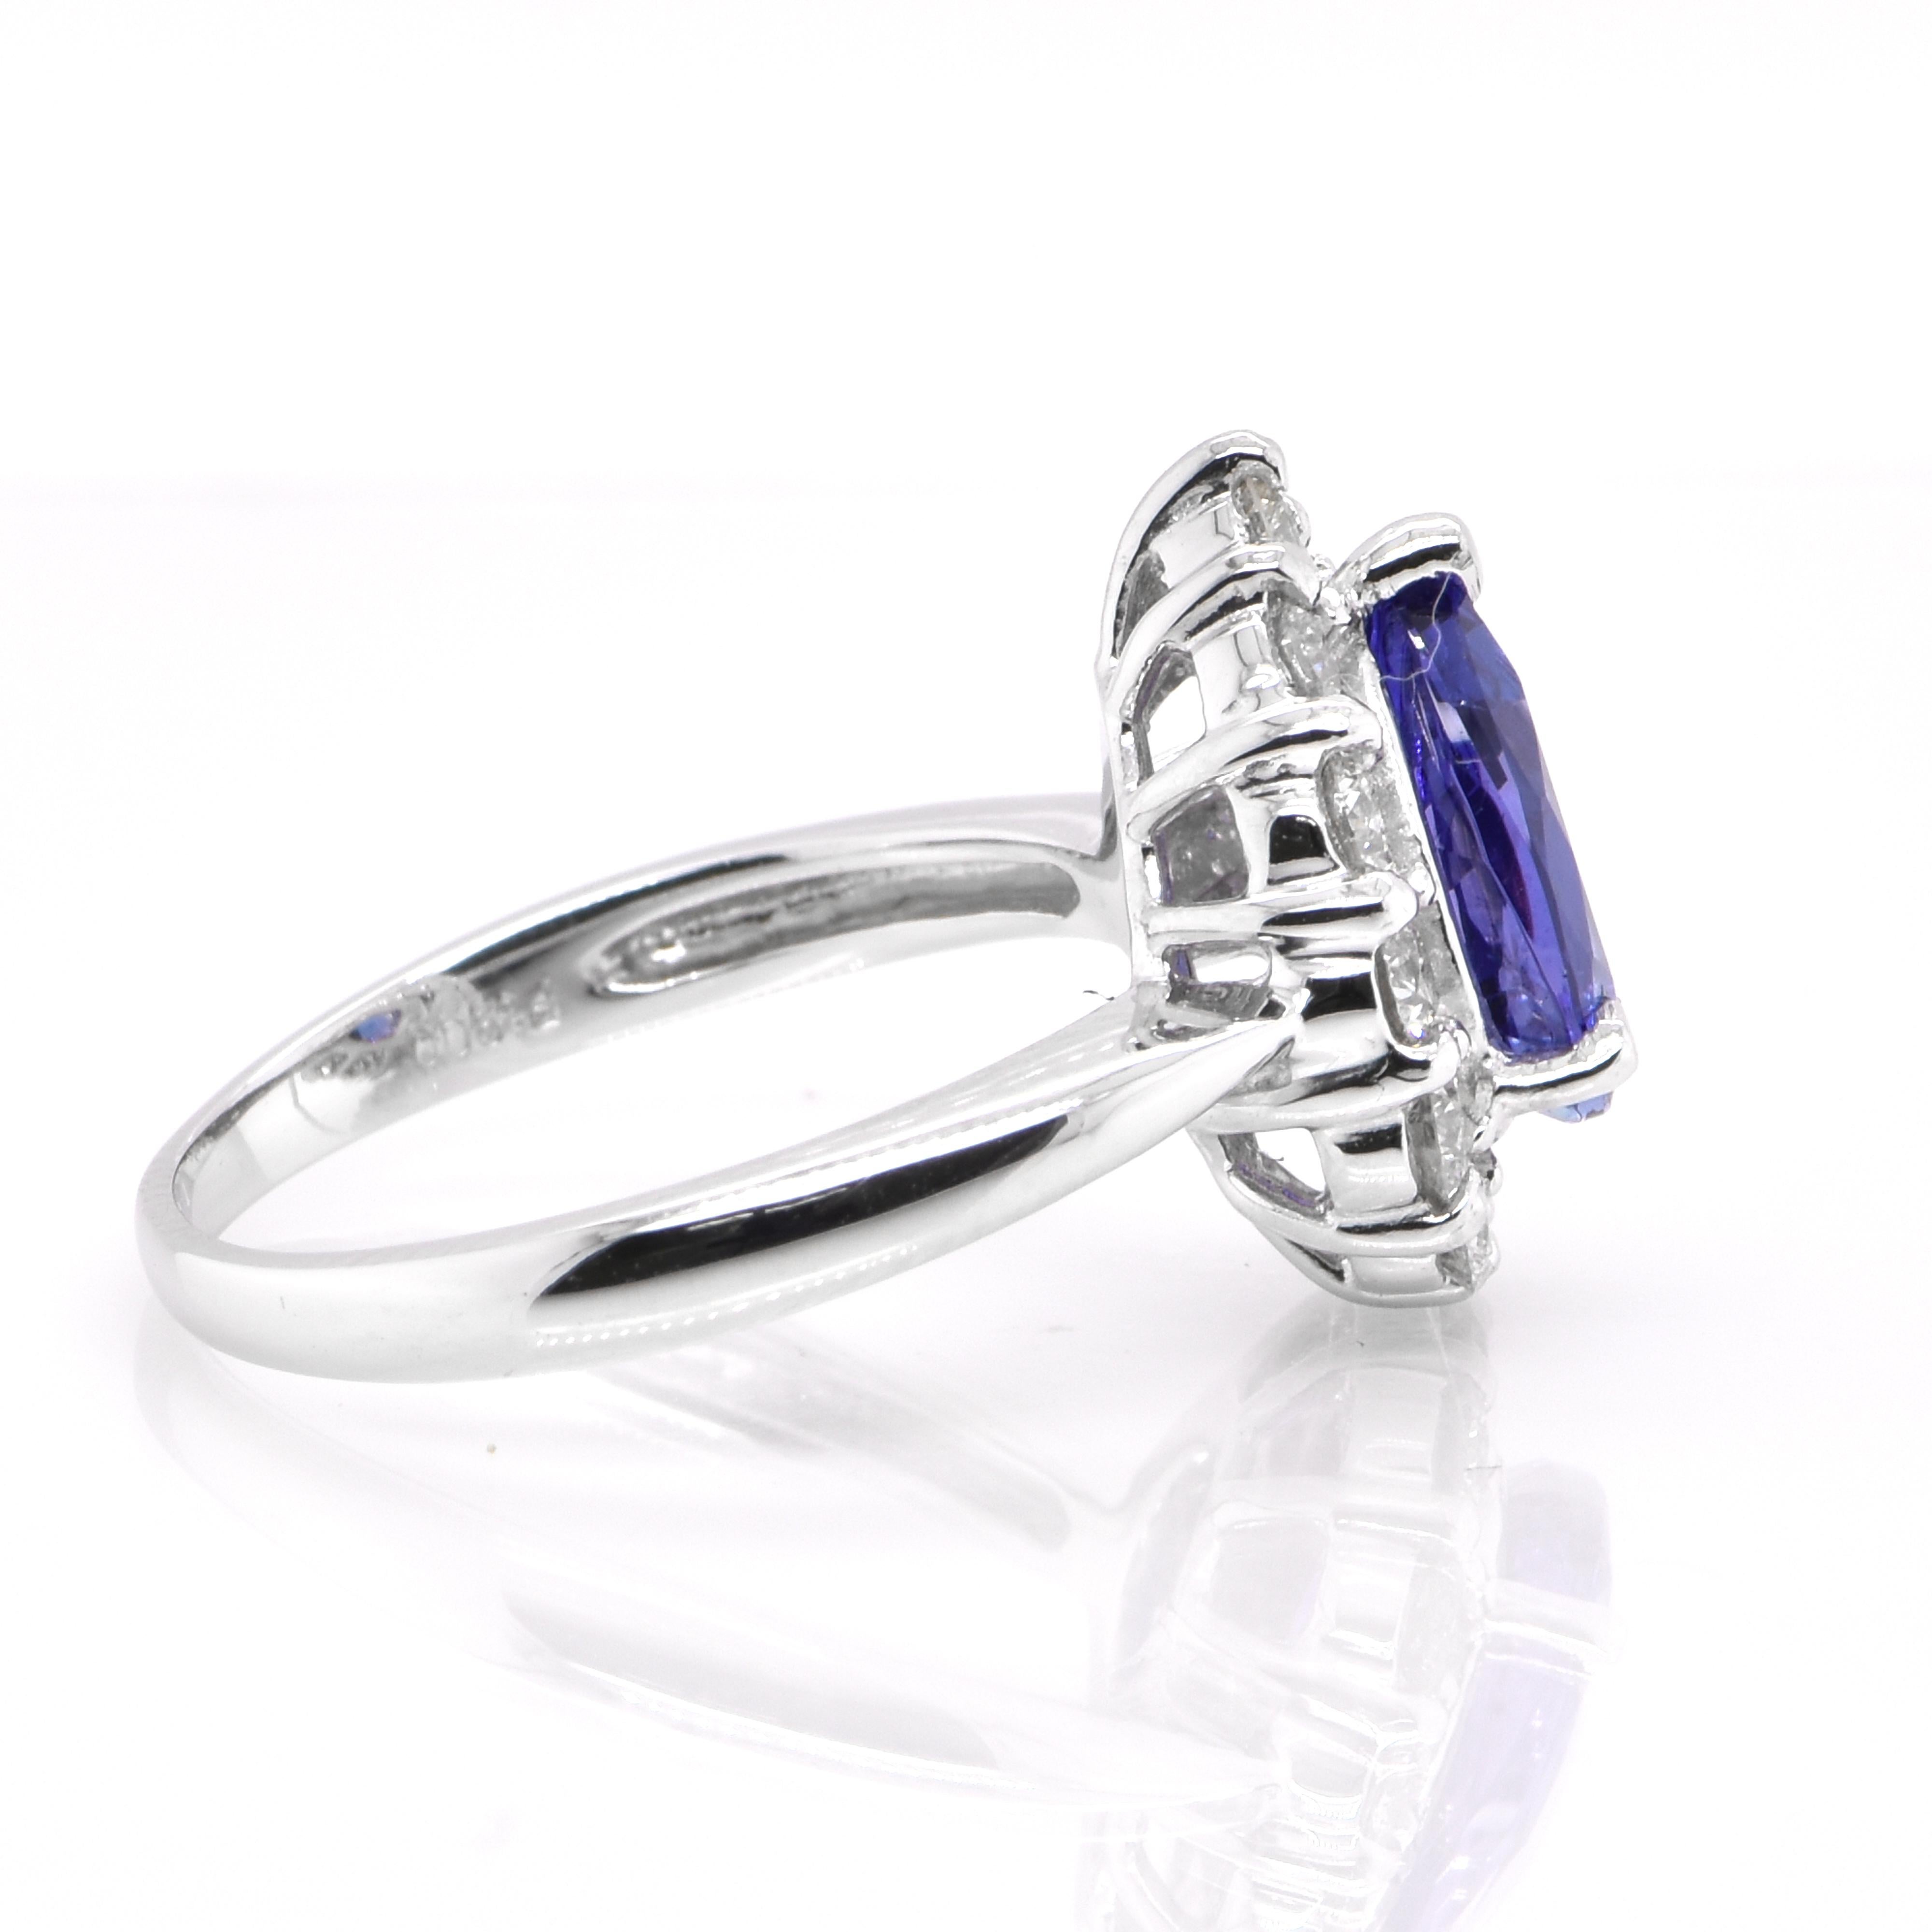 Women's 1.69 Carat Natural Pear Cut AAA+ Tanzanite and Diamond Ring Set in Platinum For Sale